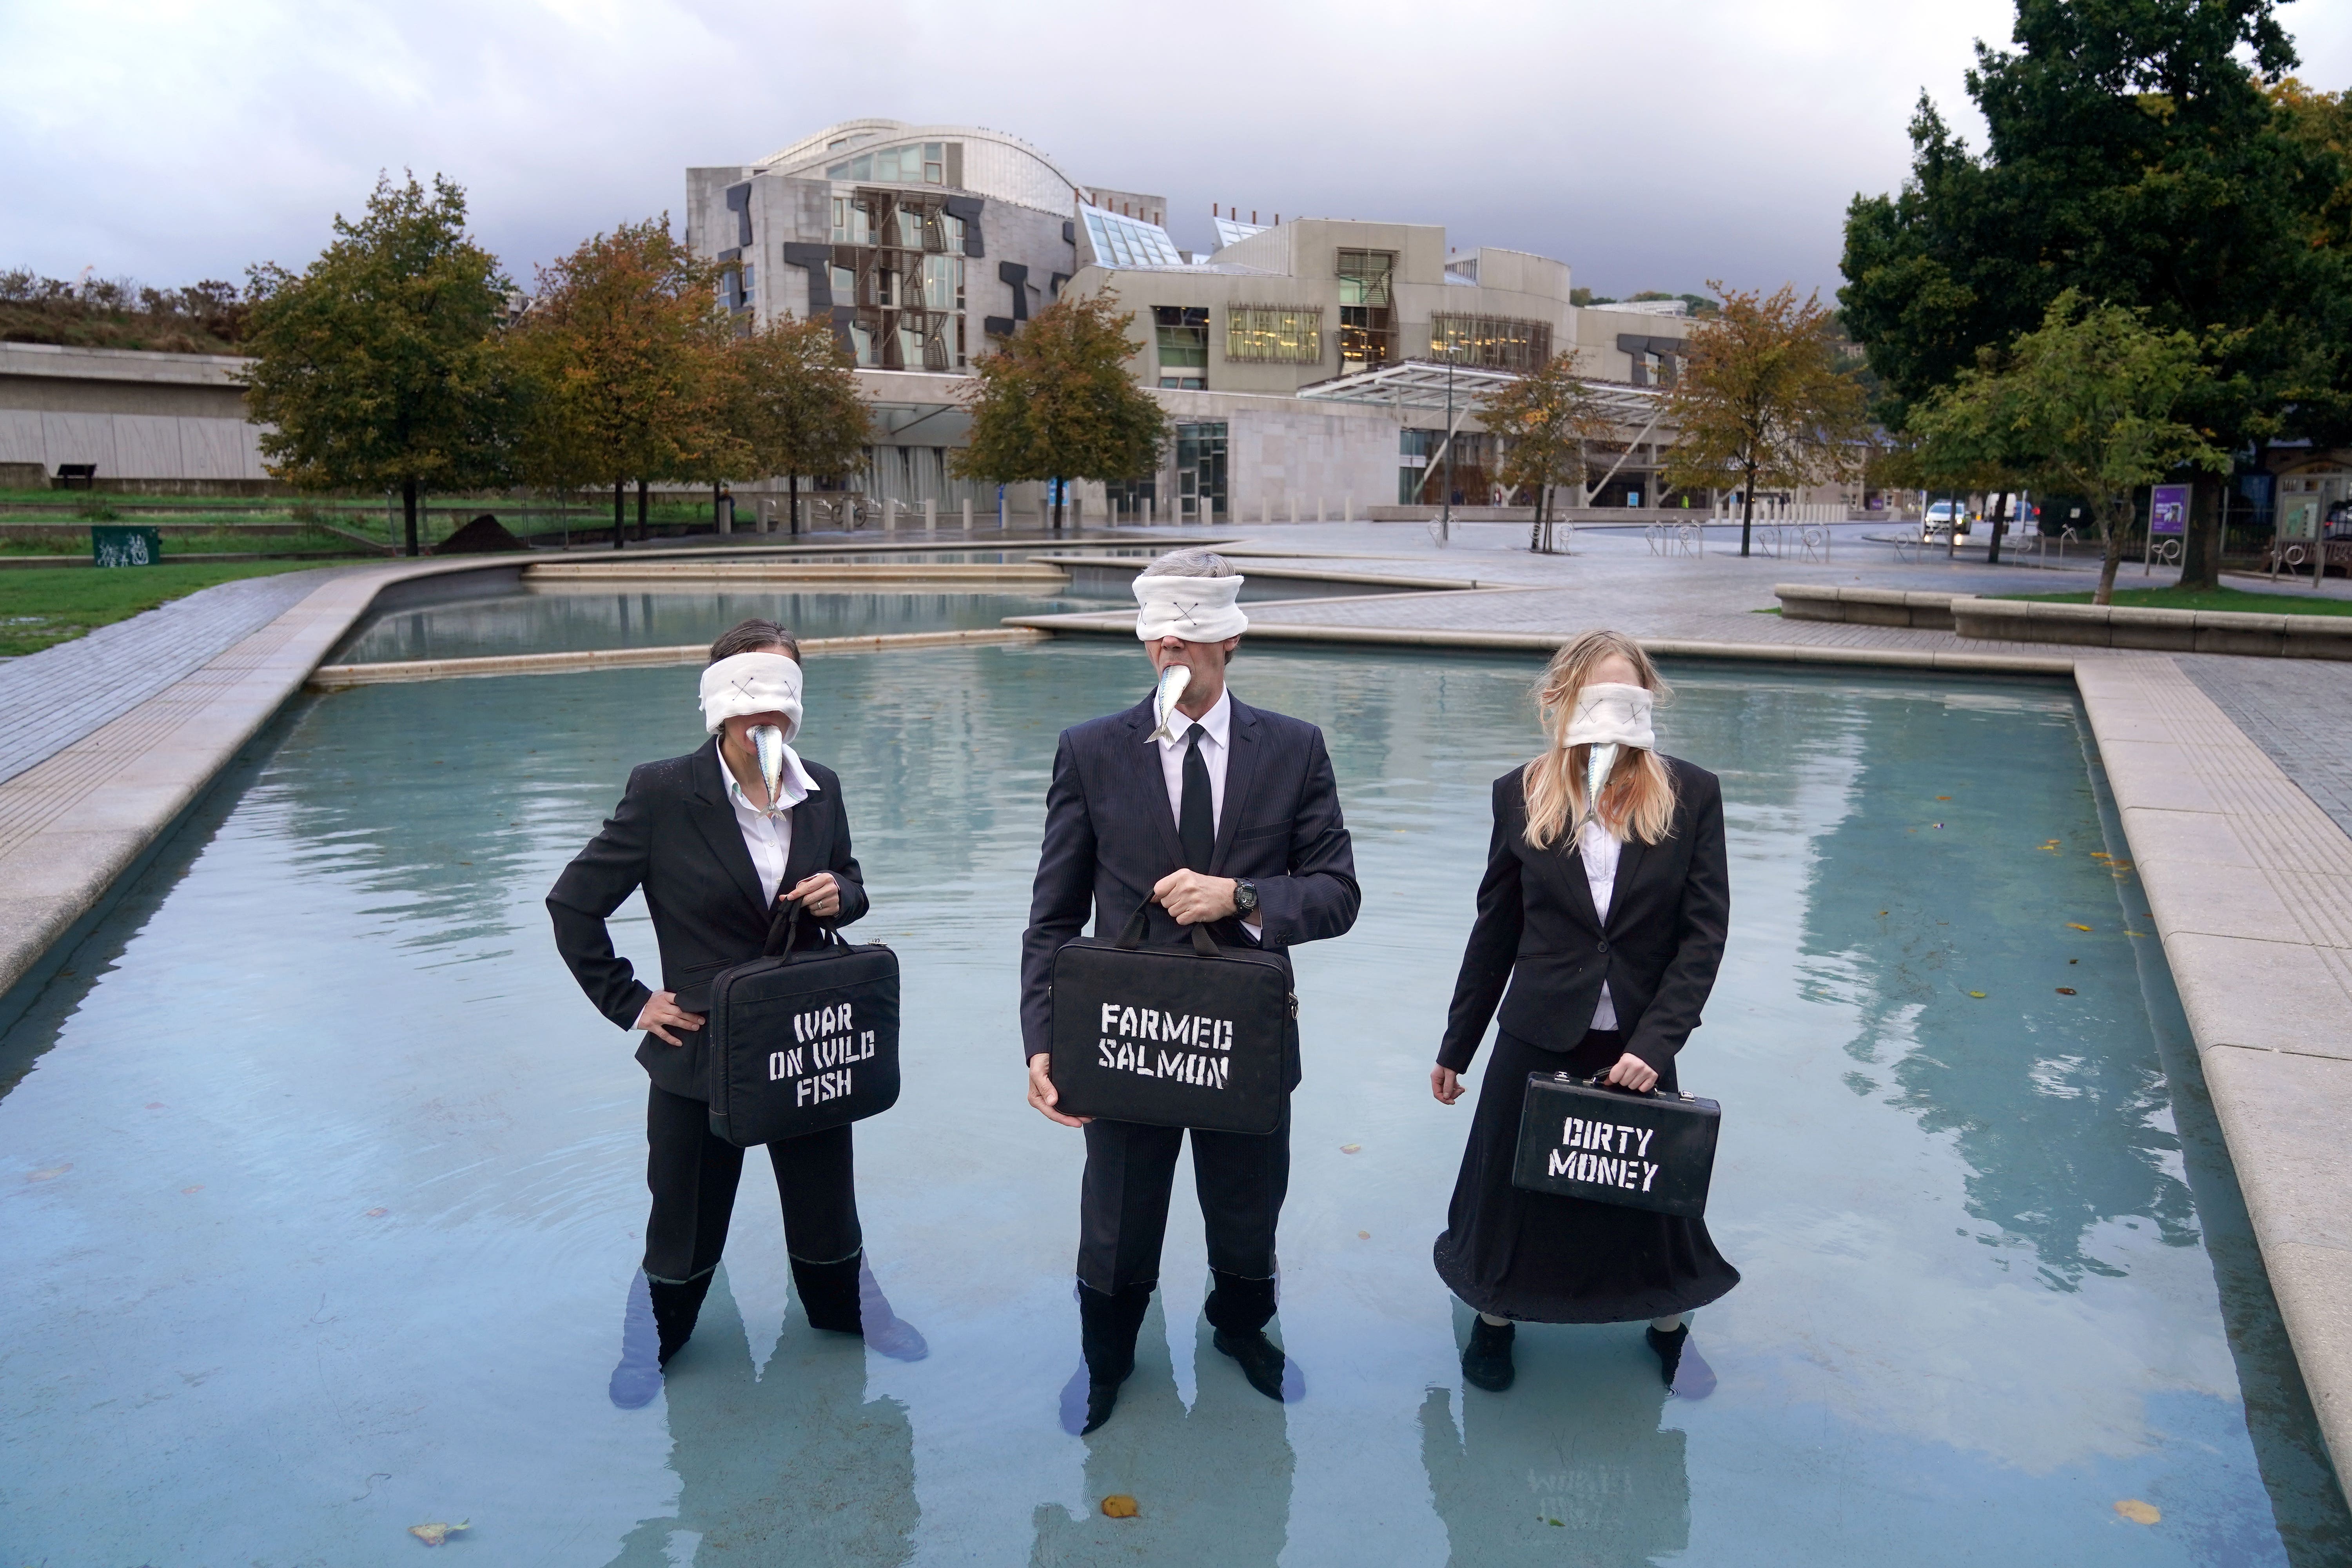 Suited performers from Ocean Rebellion stage a stunt outside Holyrood (Andrew Milligan/PA)